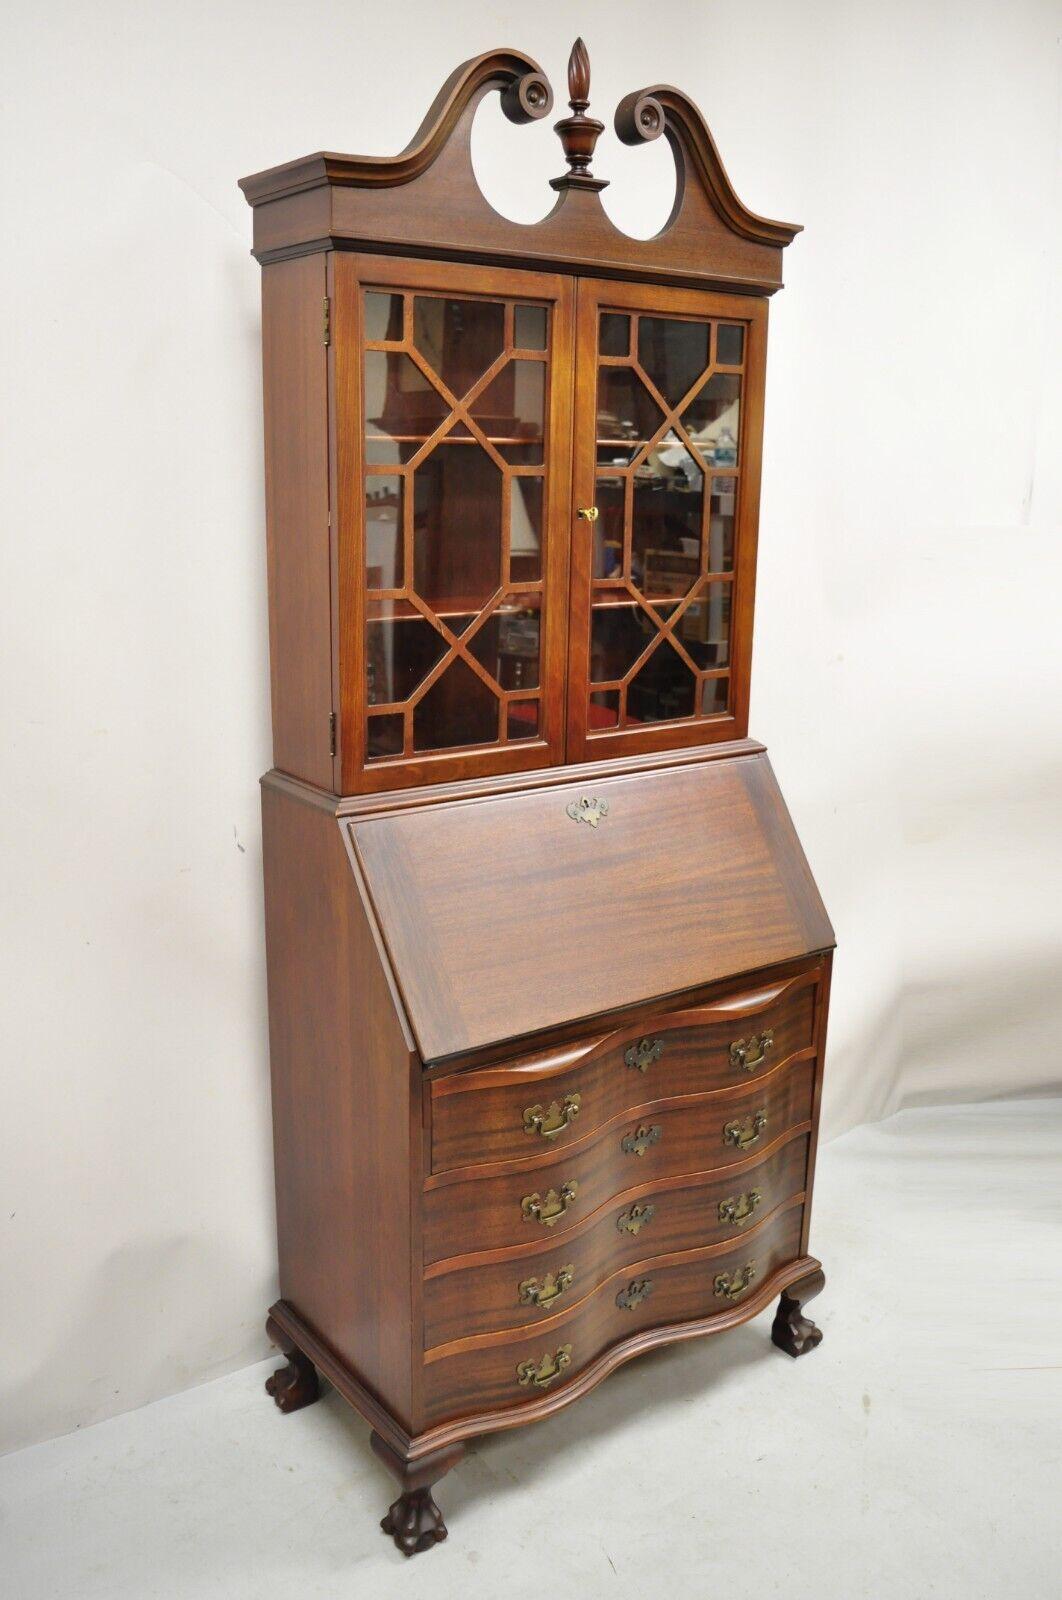 Maddox Mahogany chippendale style ball and claw secretary desk bookcase. Item features fitted interior, beautiful wood grain, original label, working lock and key, 4 dovetailed drawers, 2 wooden shelves, carved ball and claw feet, solid brass